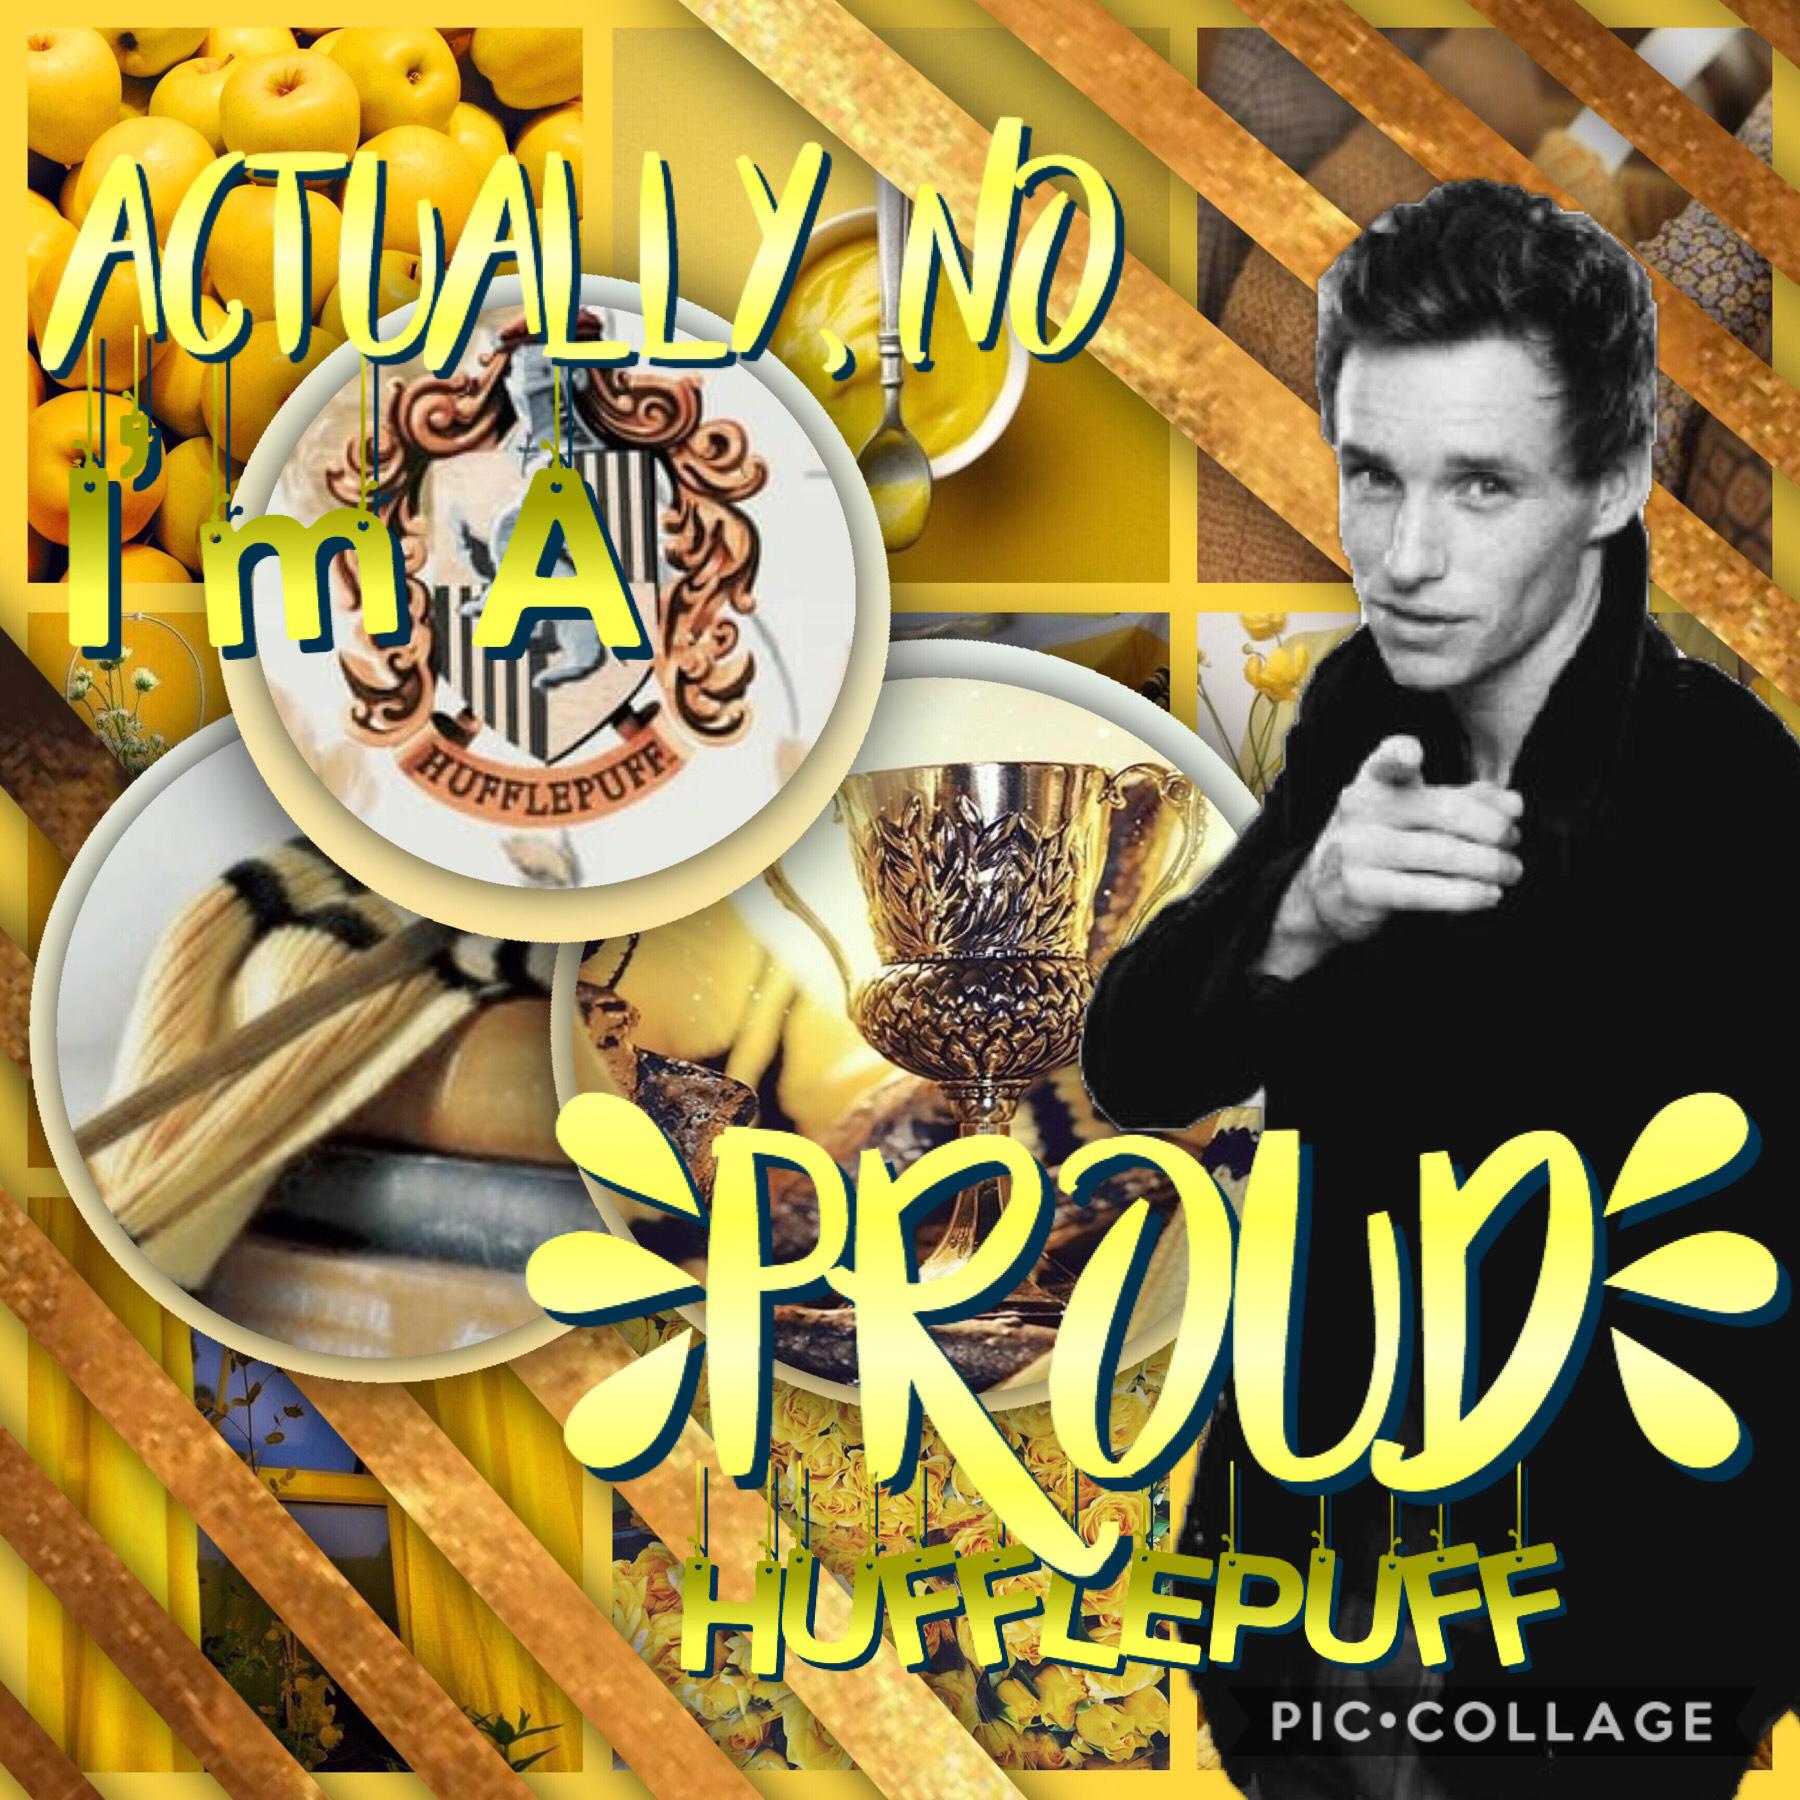 💛Tap💛

Who wouldn't be proud to be a Hufflepuff?!

QTOD: What hogwarts house do you believe you should be in and why?

AOTD:  I think I could be in either Slytherin or Hufflepuff.  I have characteristics of both, although most people don't see me as being